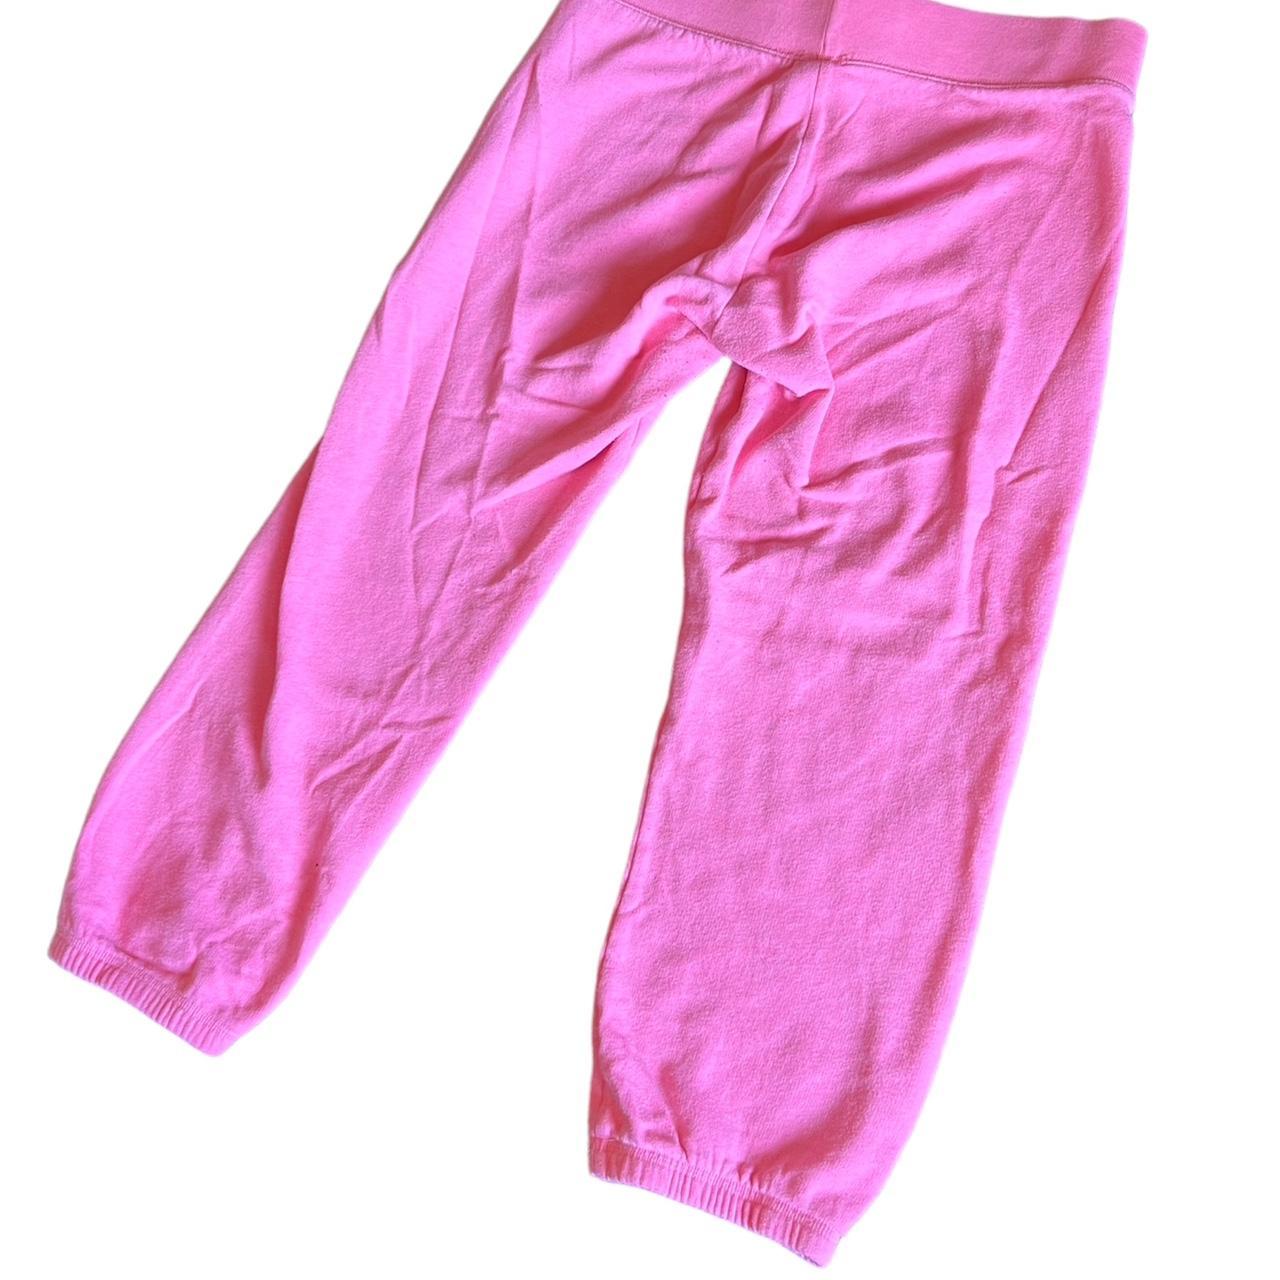 Early 2000s VS PINK sweat pants! These are soooo - Depop